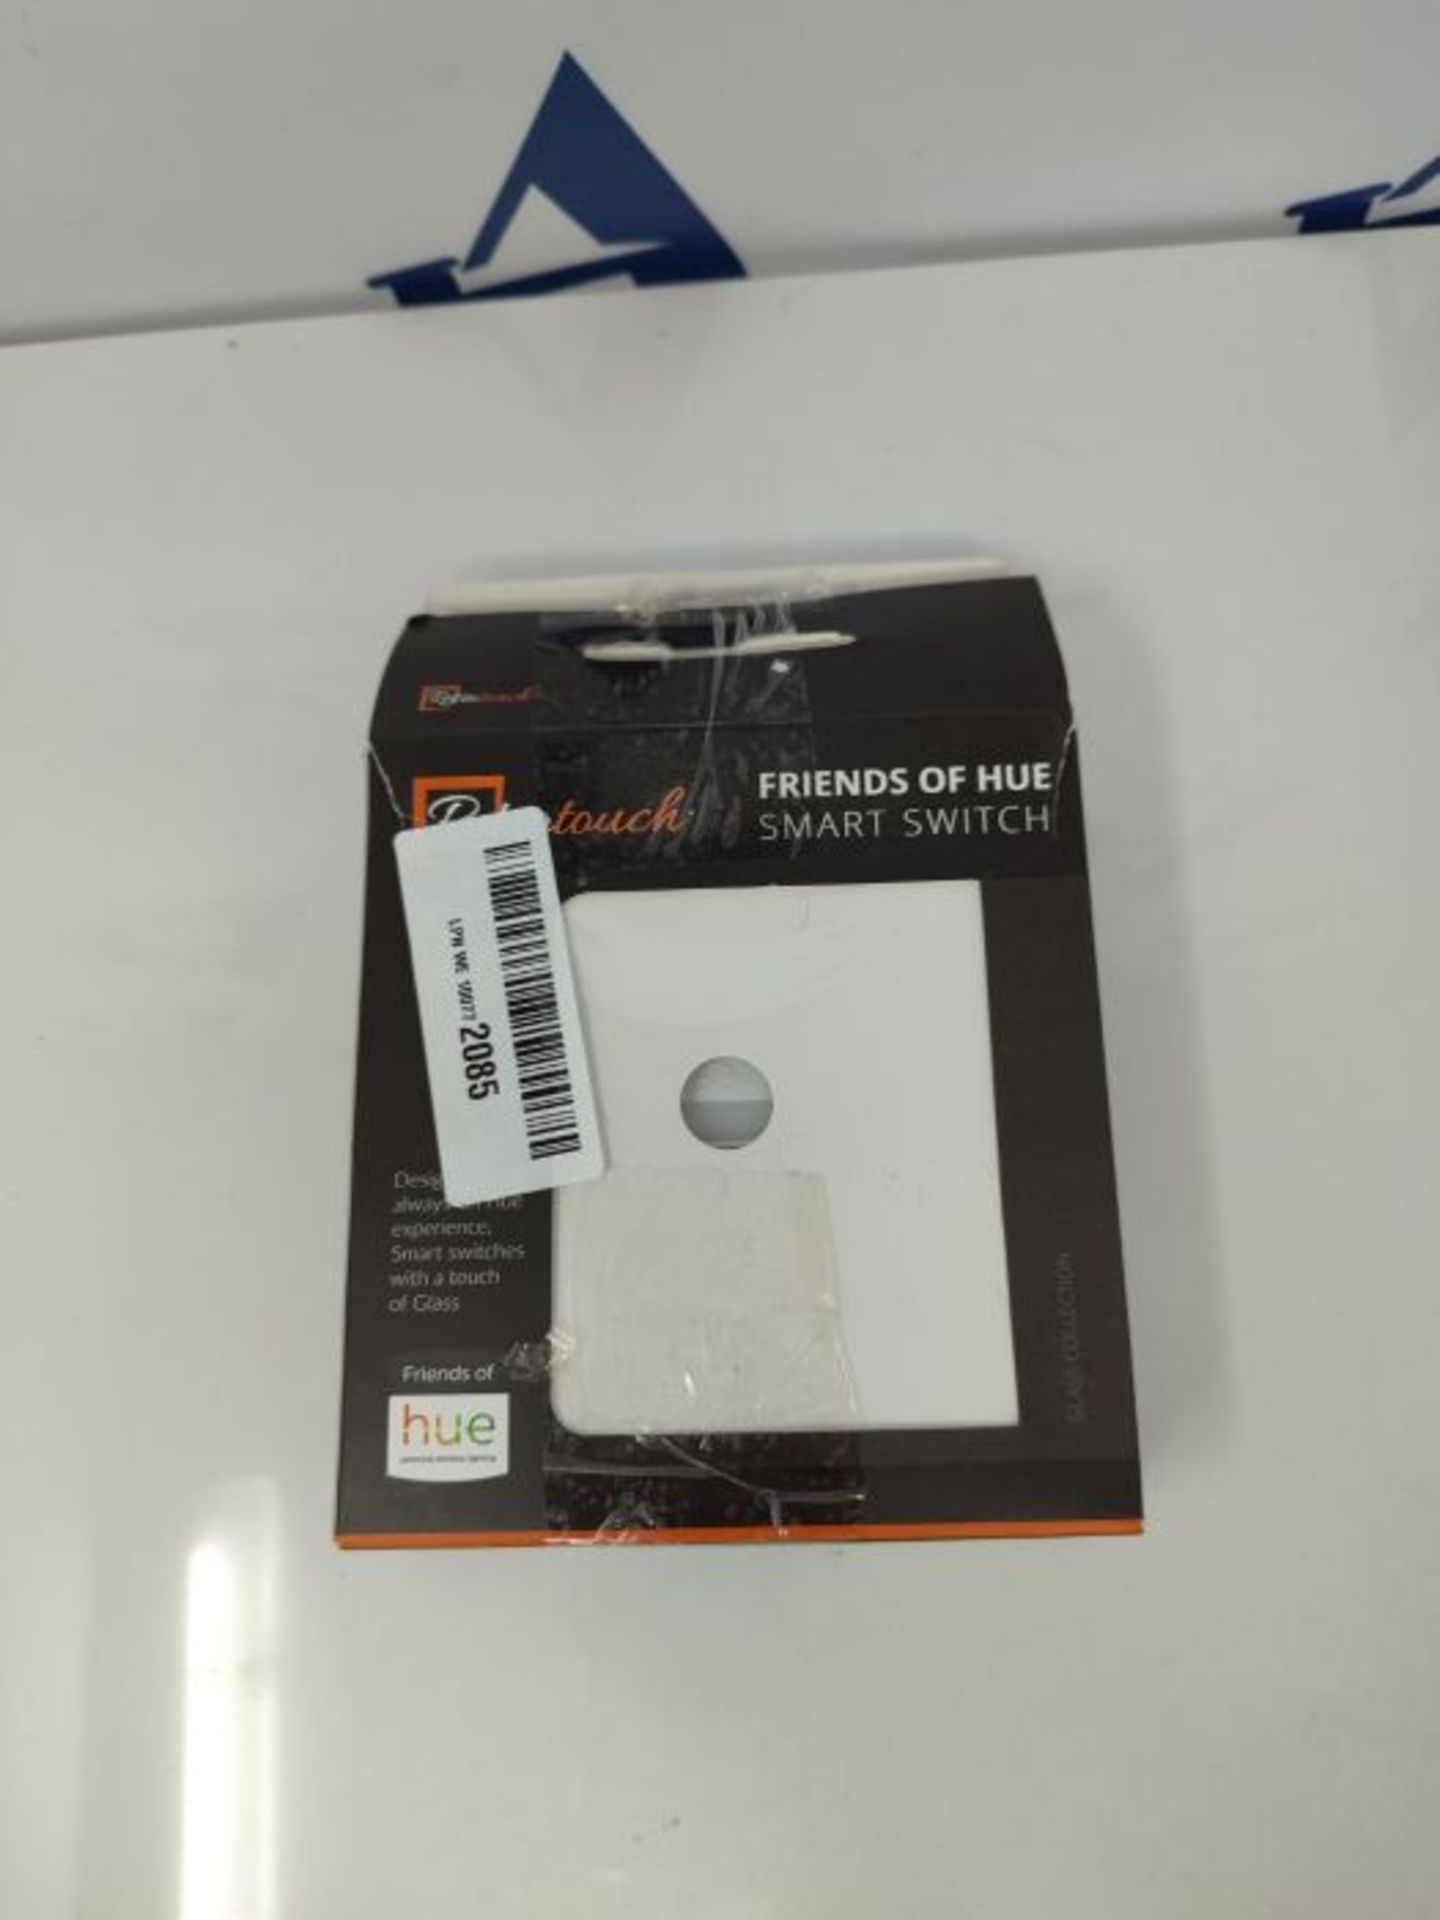 Retrotouch 2802 Friends of Hue Smart Switch - White Plain Glass, 86.0 mm*14.0 mm*86.0 - Image 2 of 3